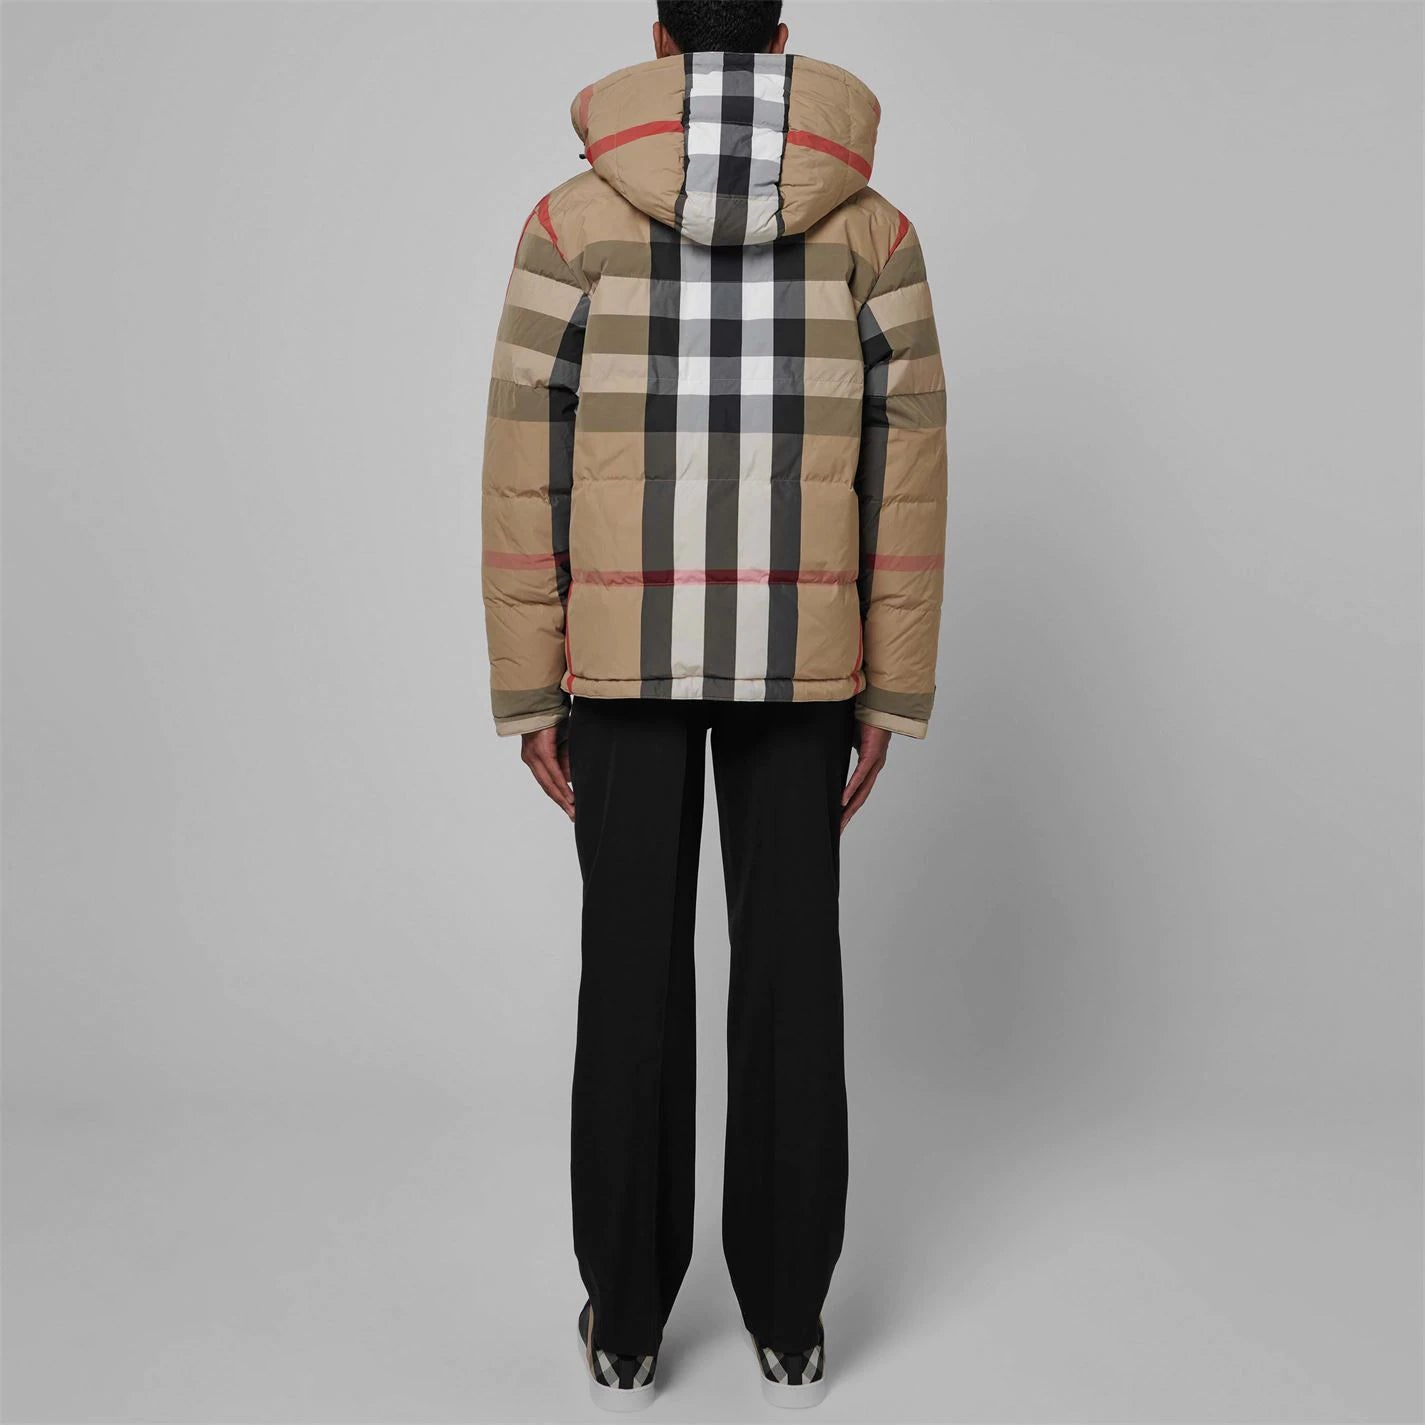 Burberry Reversible Hooded Puffer Jacket